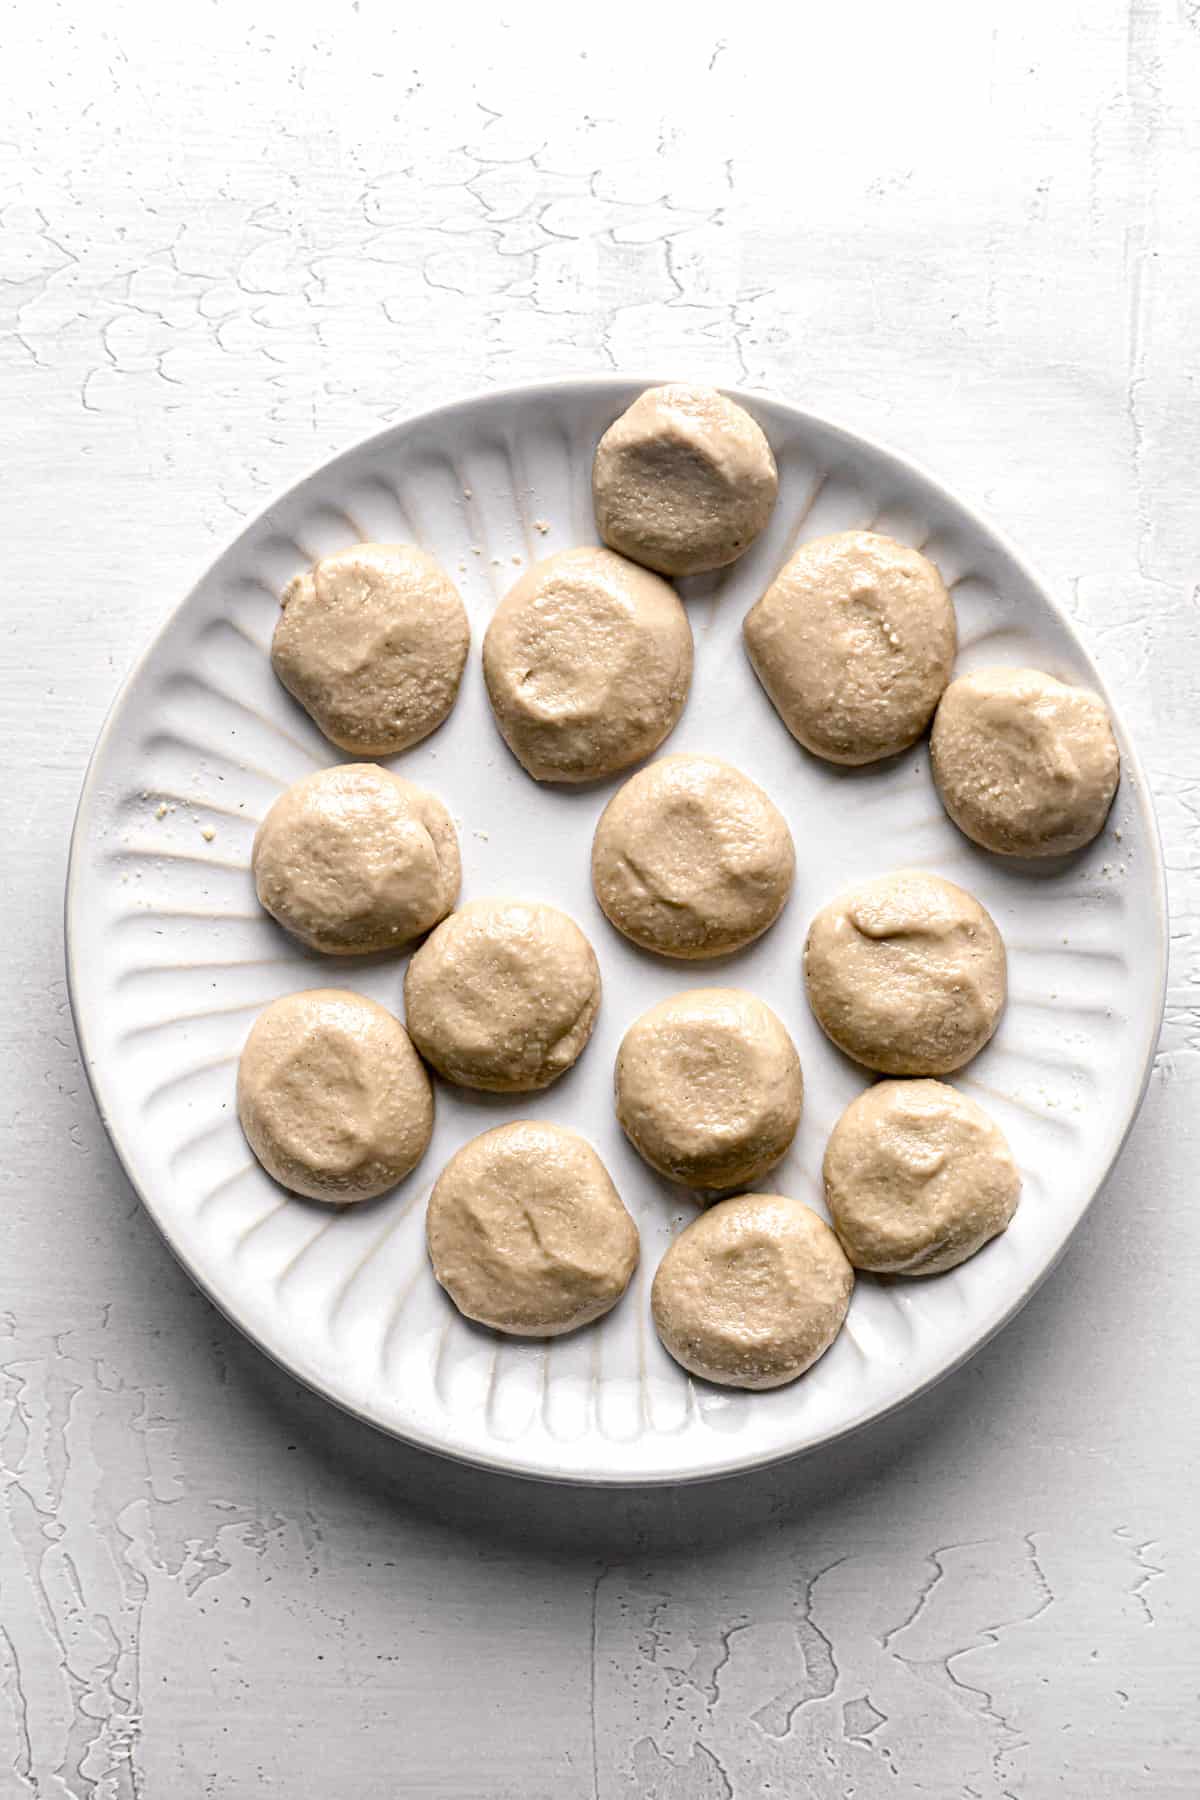 tahini filling shaped into disks on white plate.